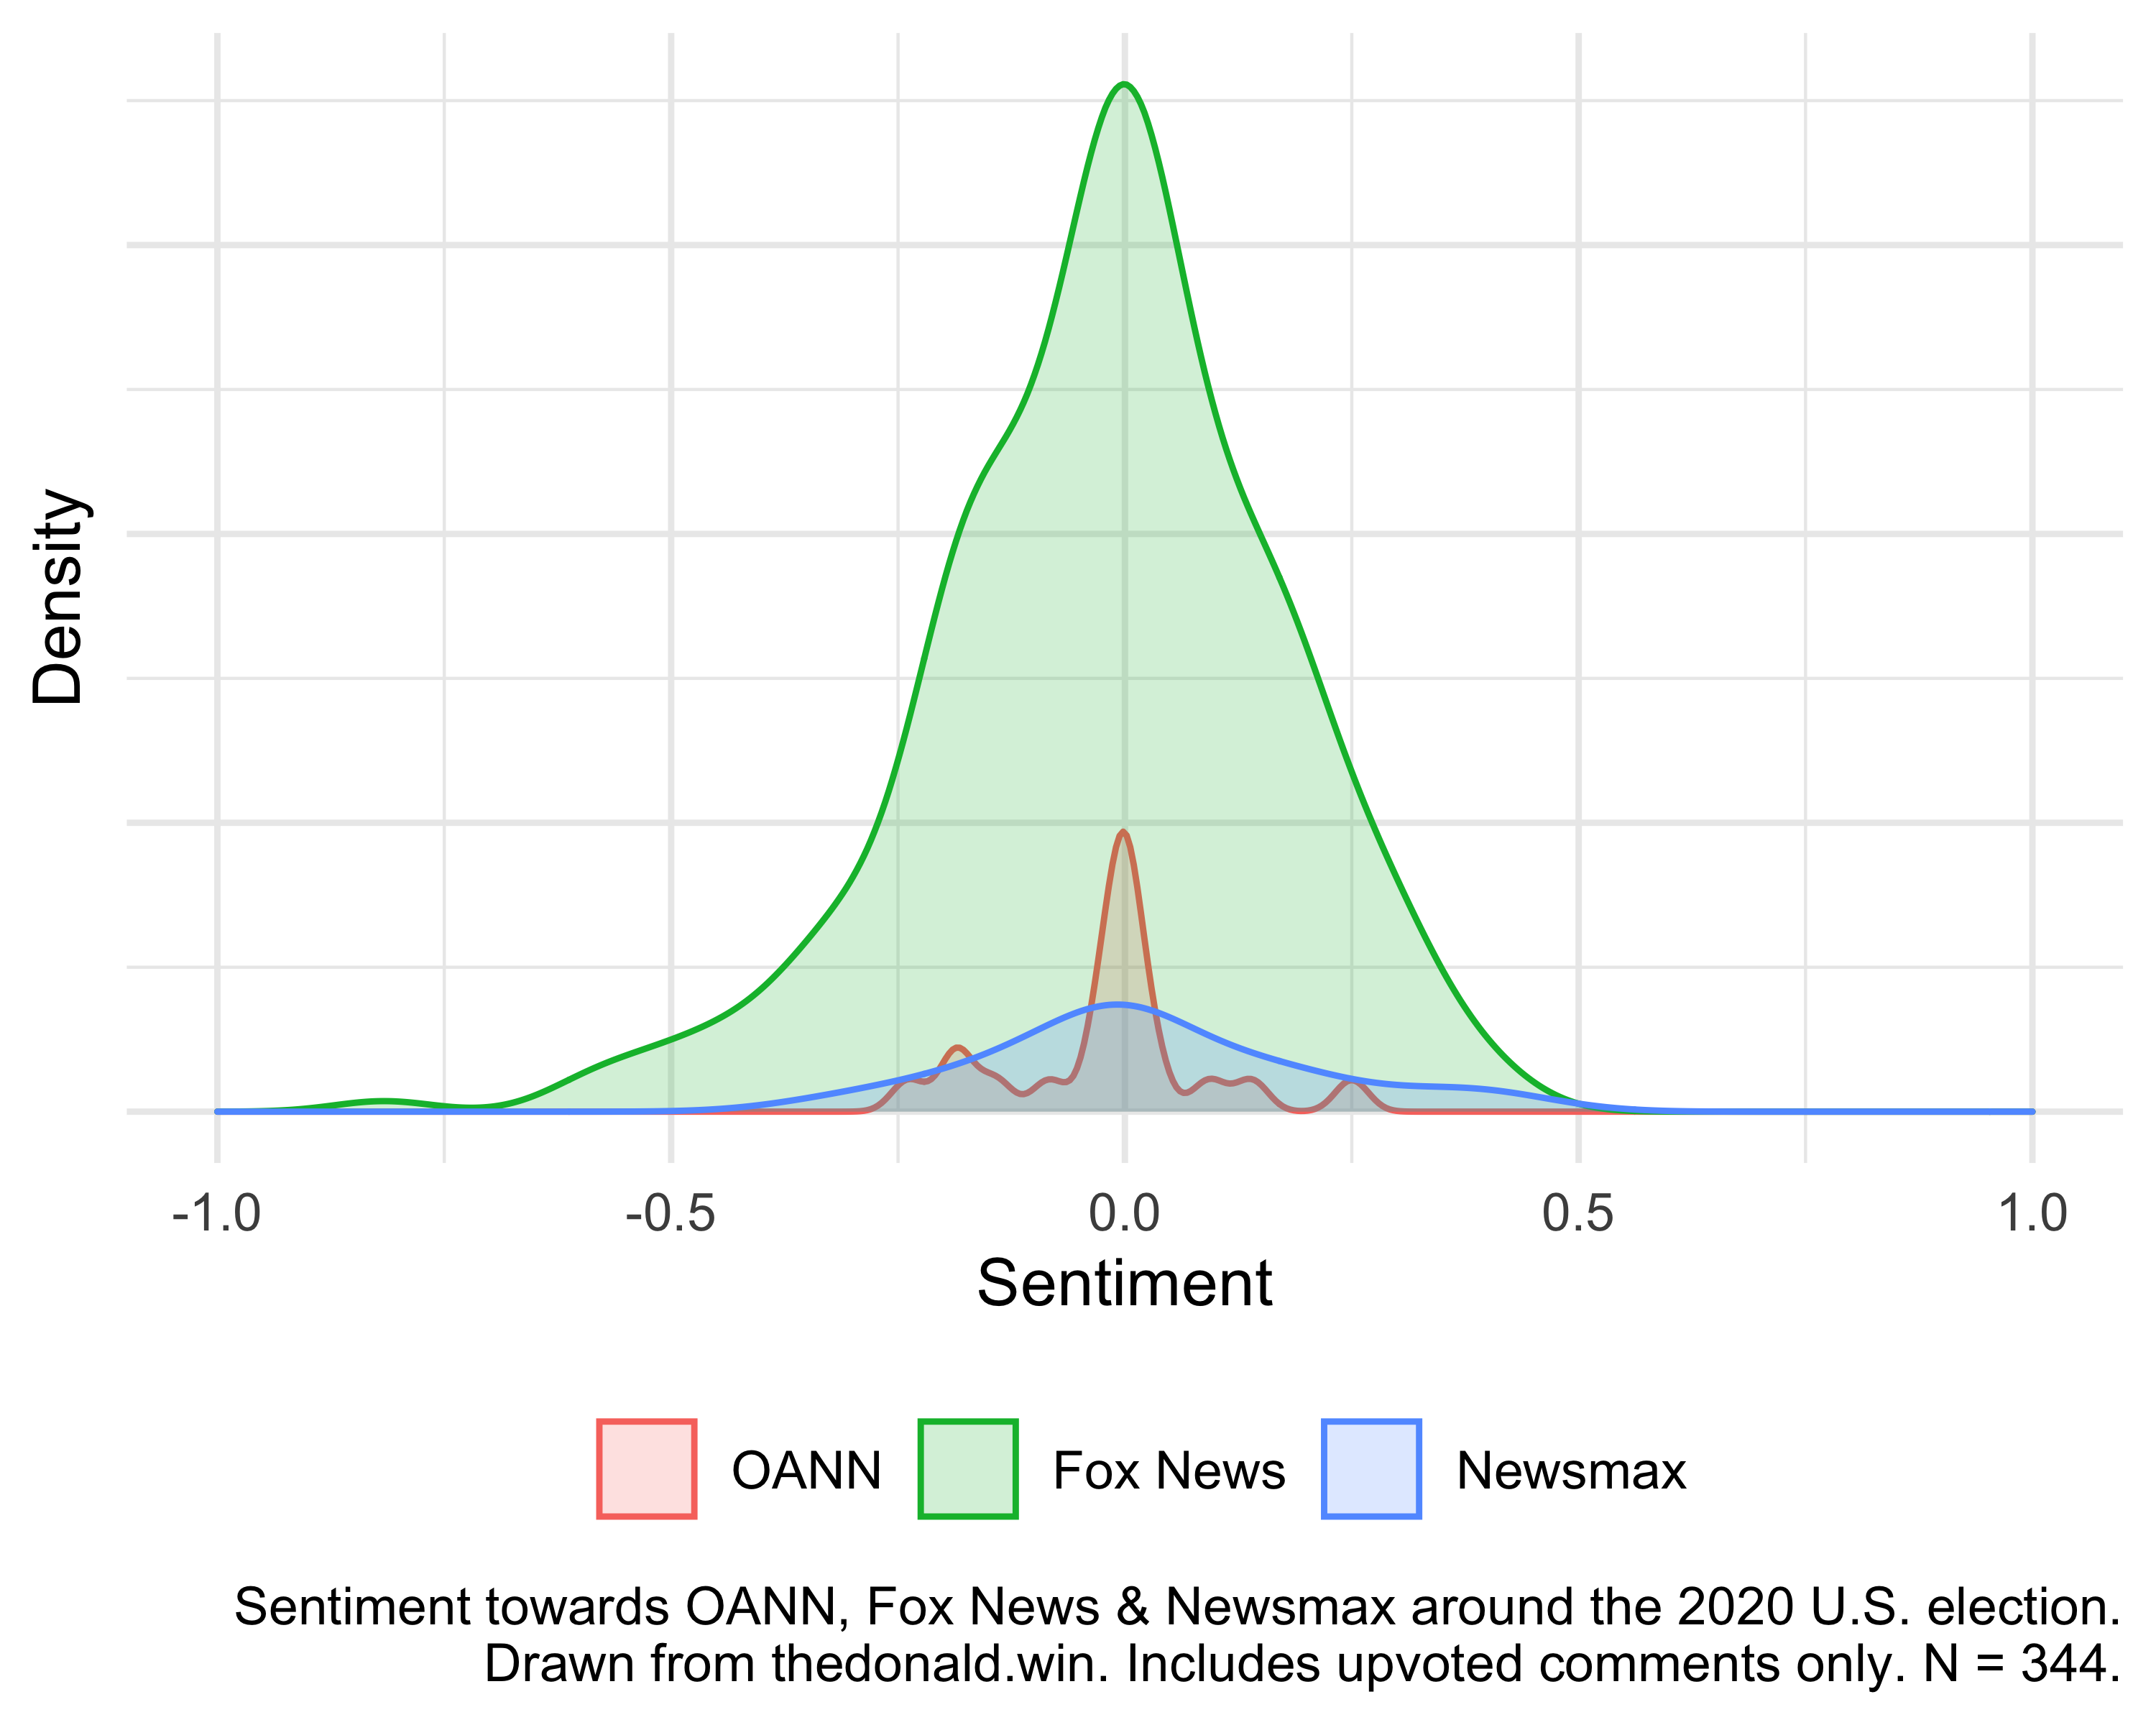 Plot showing sentiment towards OANN, Fox News and Newsmax around the 2020 U.S. election.